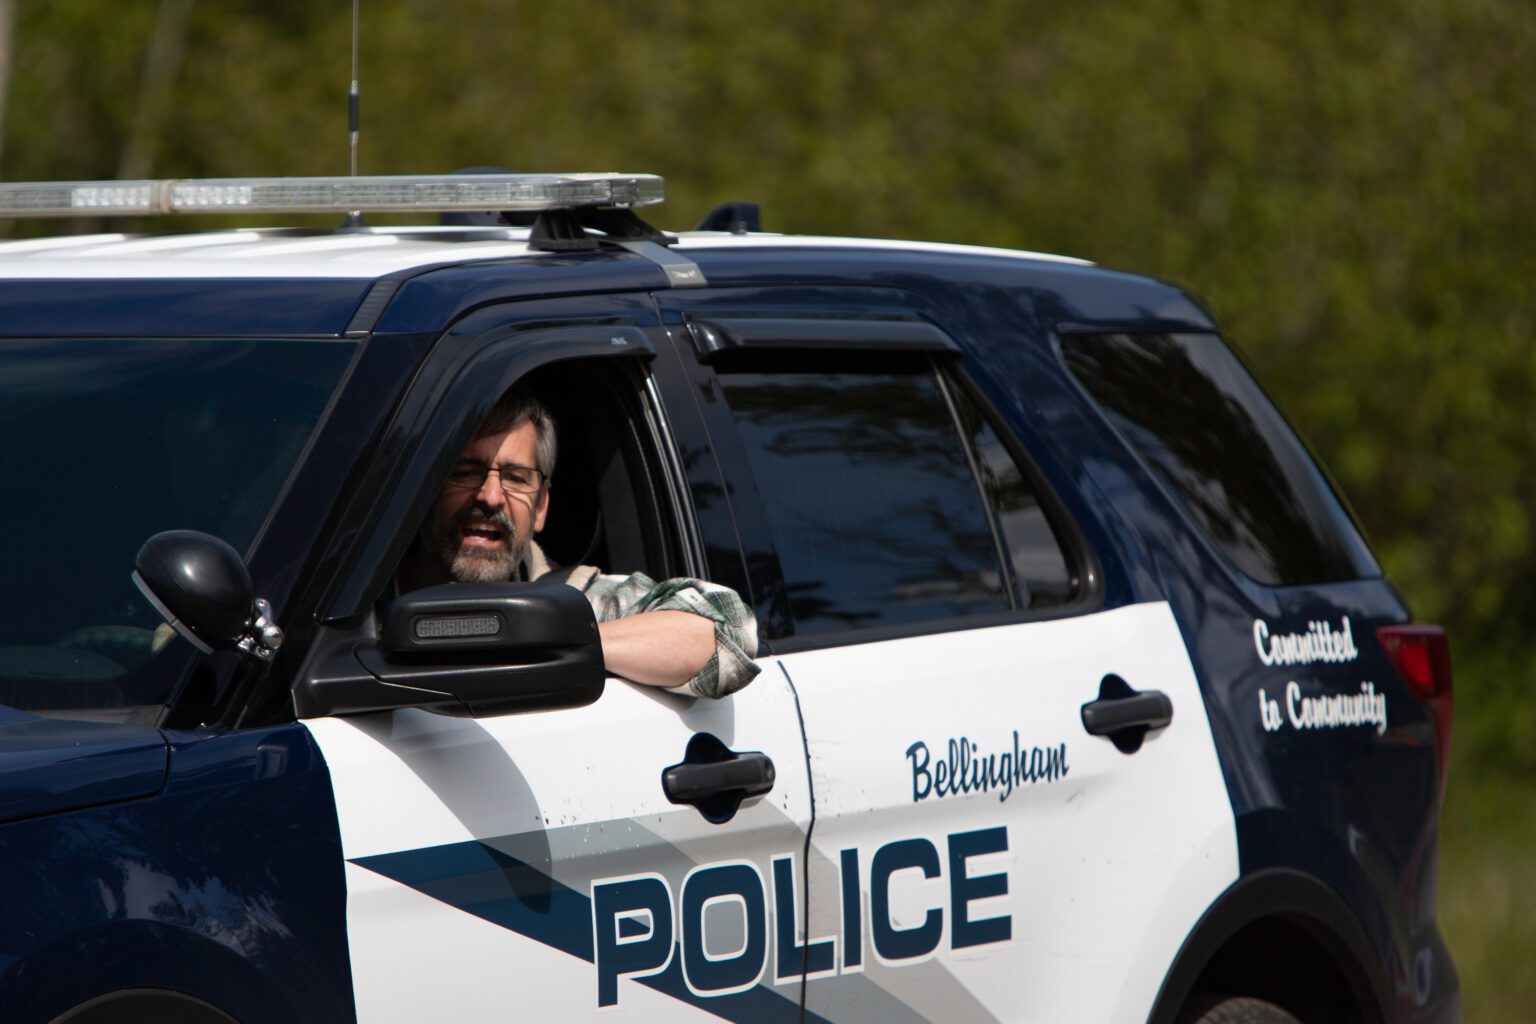 Bellingham City Council member Michael Lilliquist drives a police vehicle in a backing drill in May. Mayor Seth Fleetwood said staffing shortages in the city's police department are not due to a lack of budget